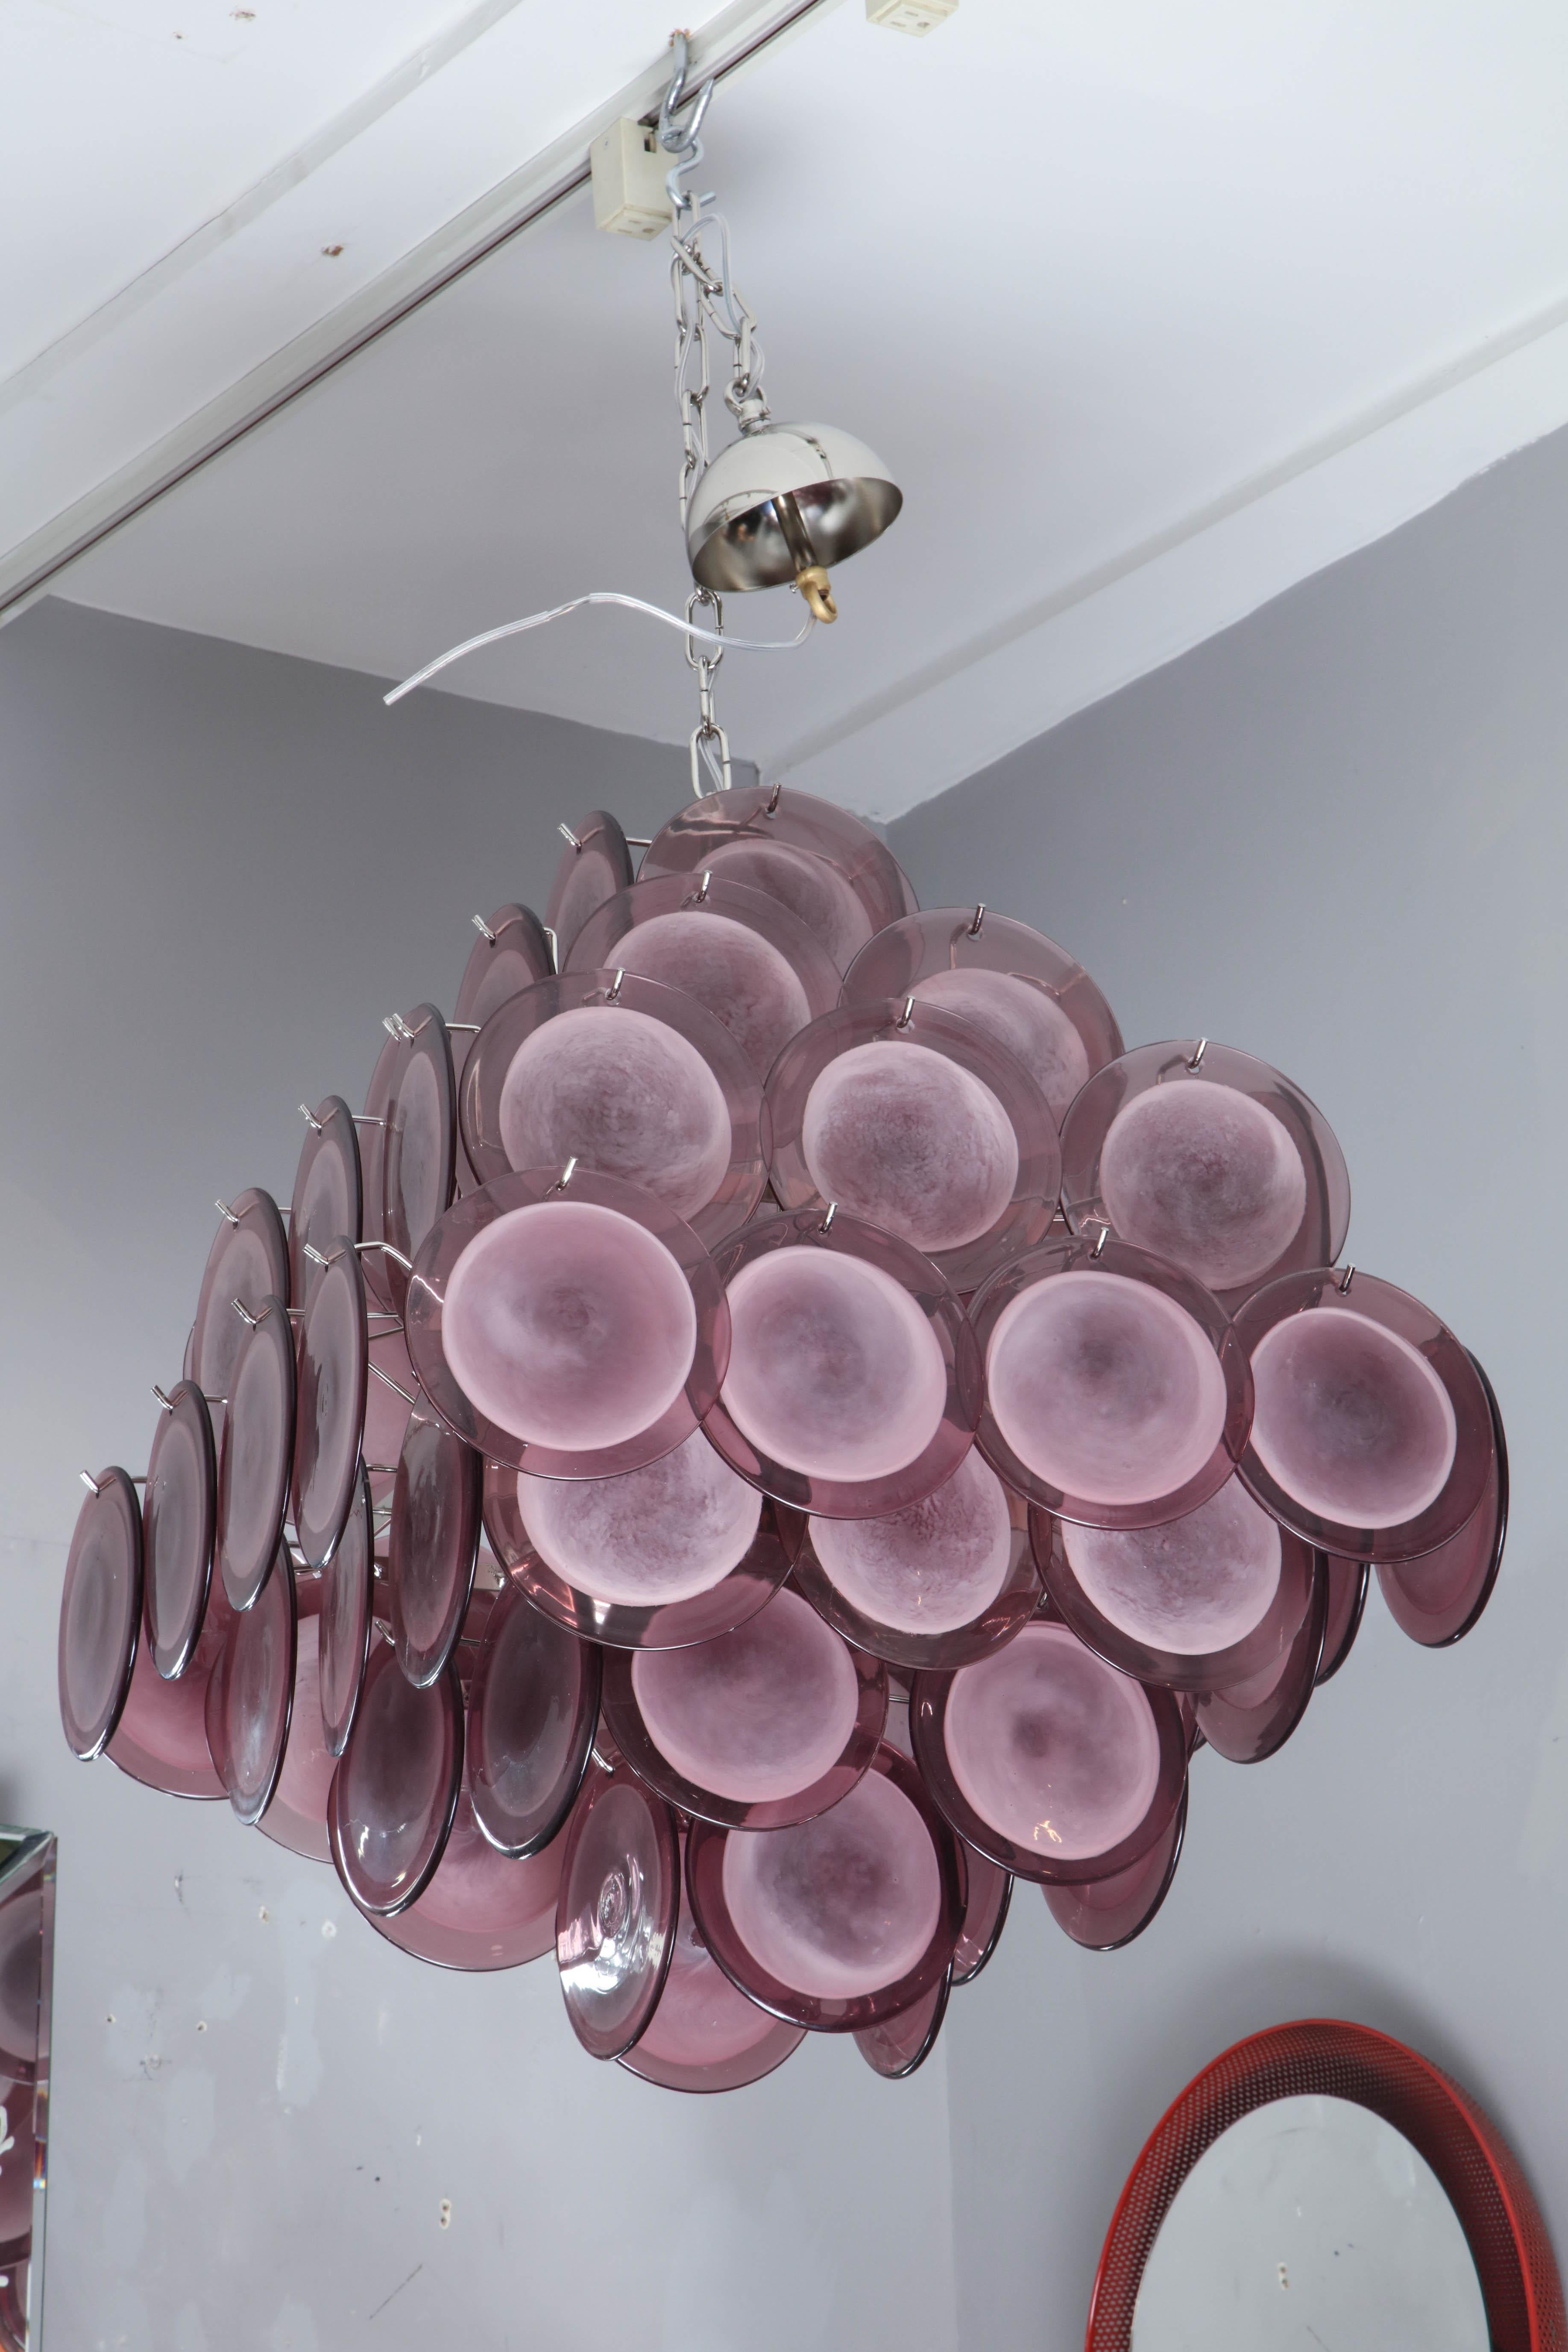 Made to order amethyst Murano glass disc chandelier in 